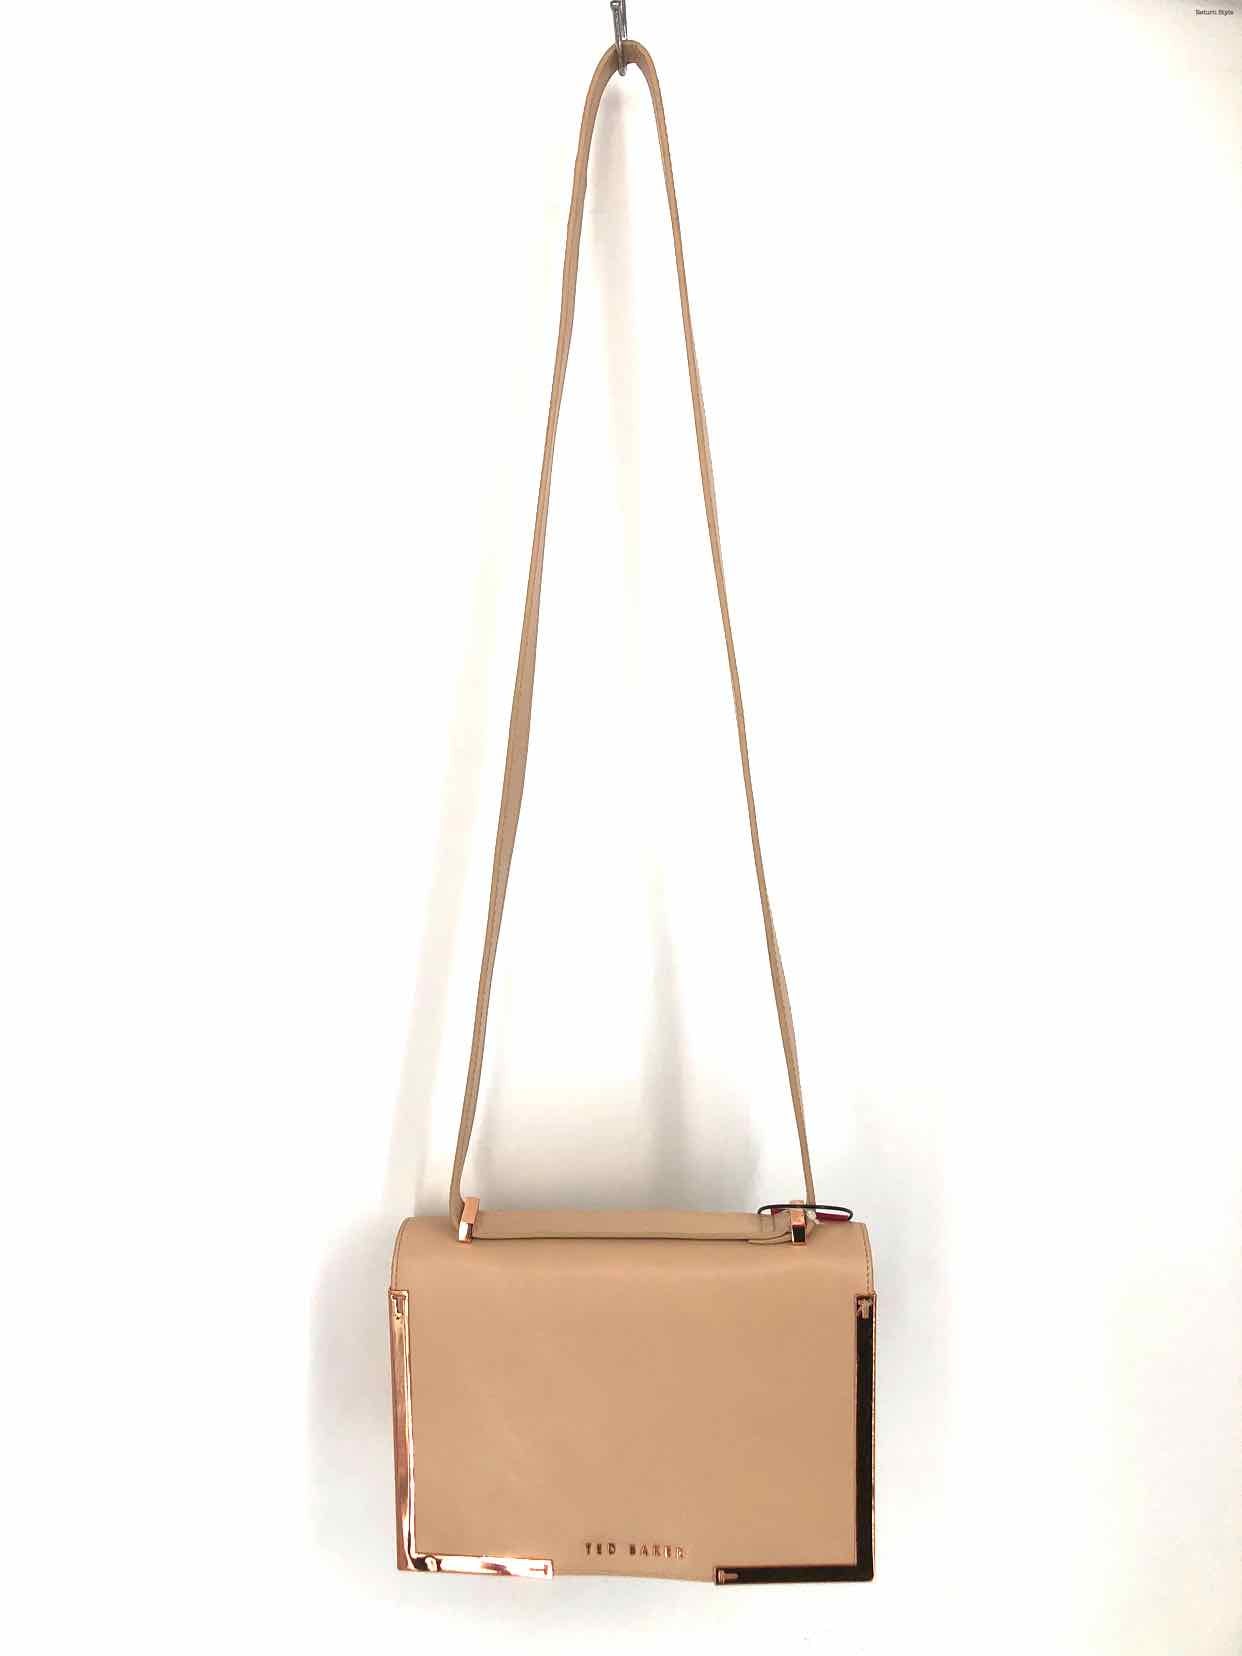 KATE SPADE Beige Gold Pebbled Leather Purse – ReturnStyle